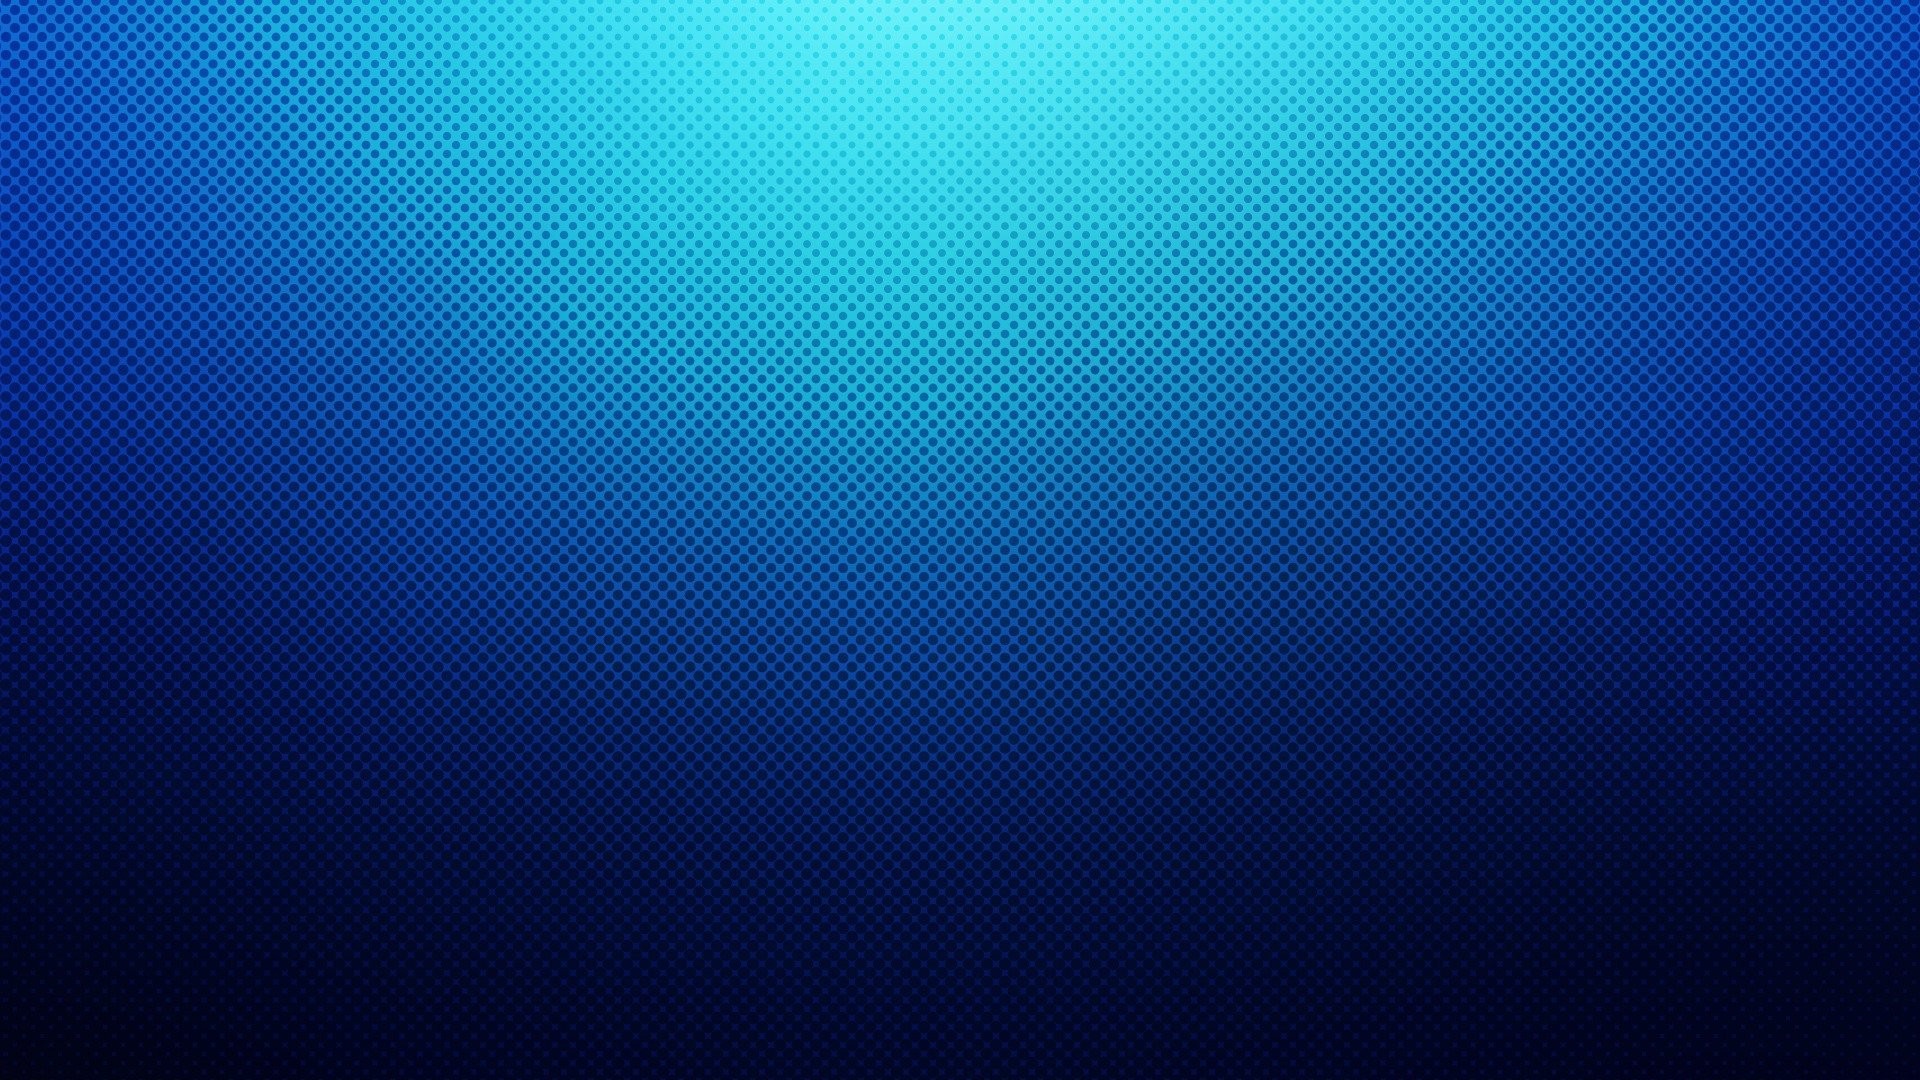 1920x1080 786760149819-blue-cool-backgrounds-patterns-wallpapers-pattern